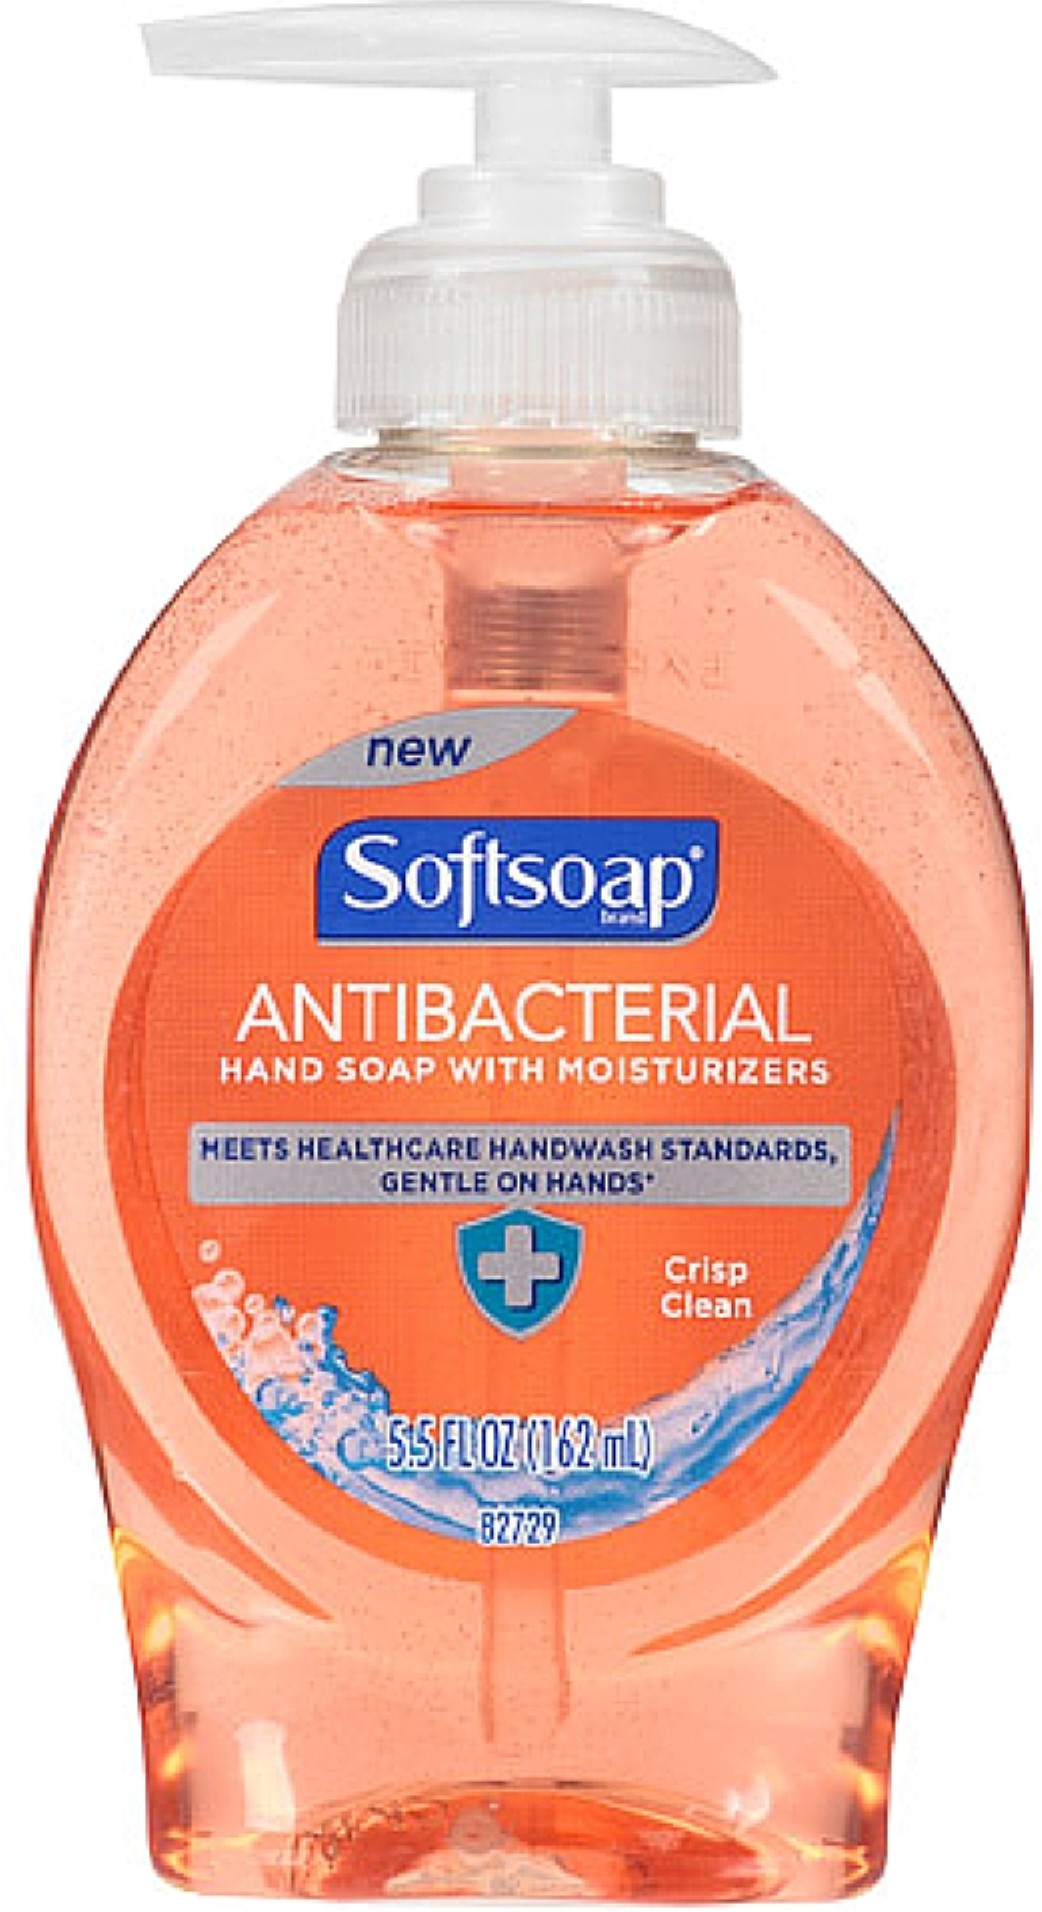 Softsoap Antibacterial Hand Soap with Moisturizers, Crisp Clean 5.50 oz (Pack of 2) - image 1 of 1